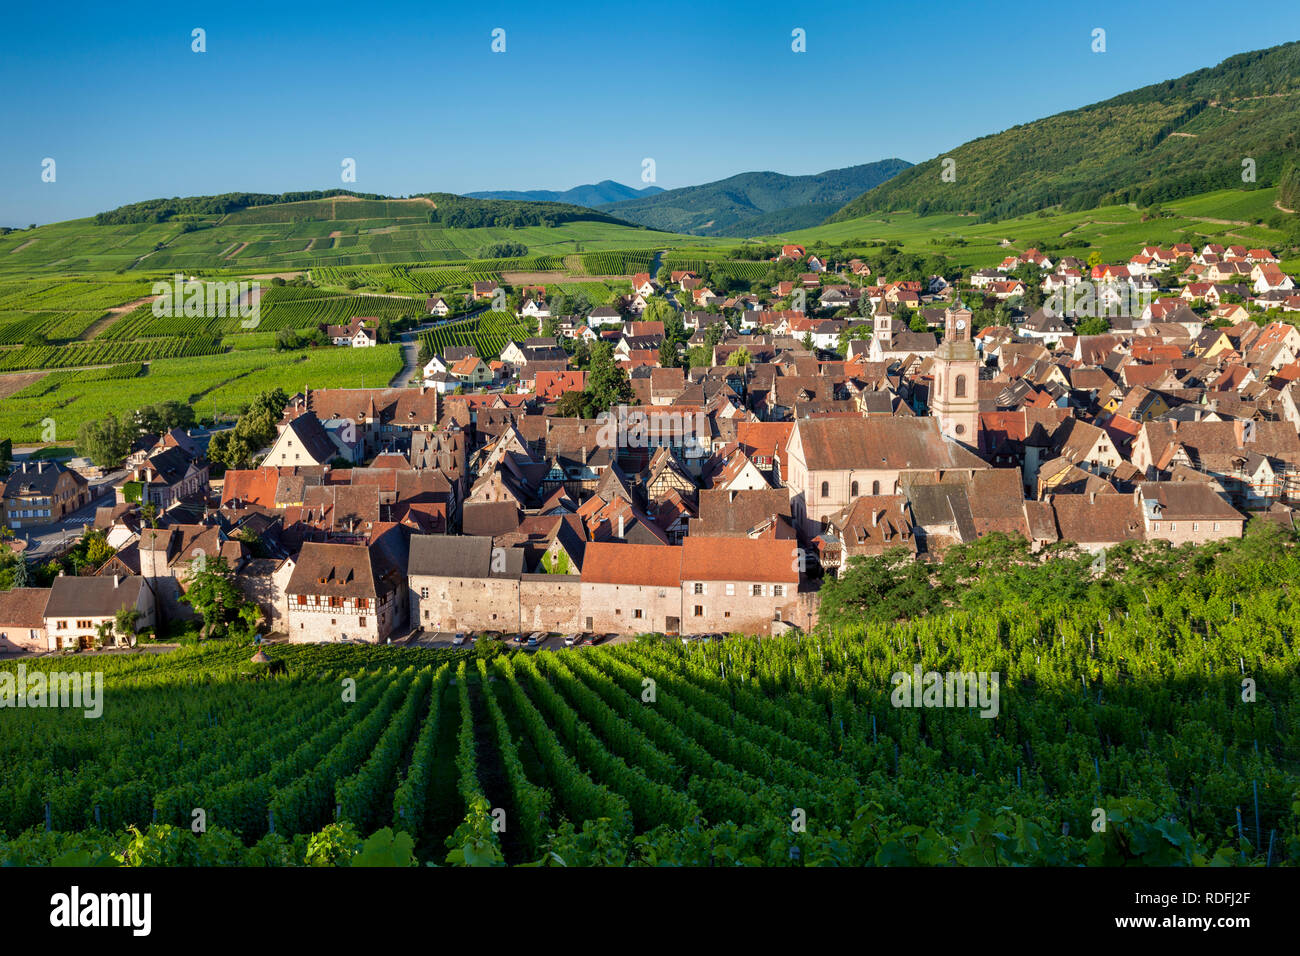 Early morning overlooking Eglise Protestant and medieval village of Riquewihr, along the Wine Route, Alsace, Haut-Rhin, France Stock Photo